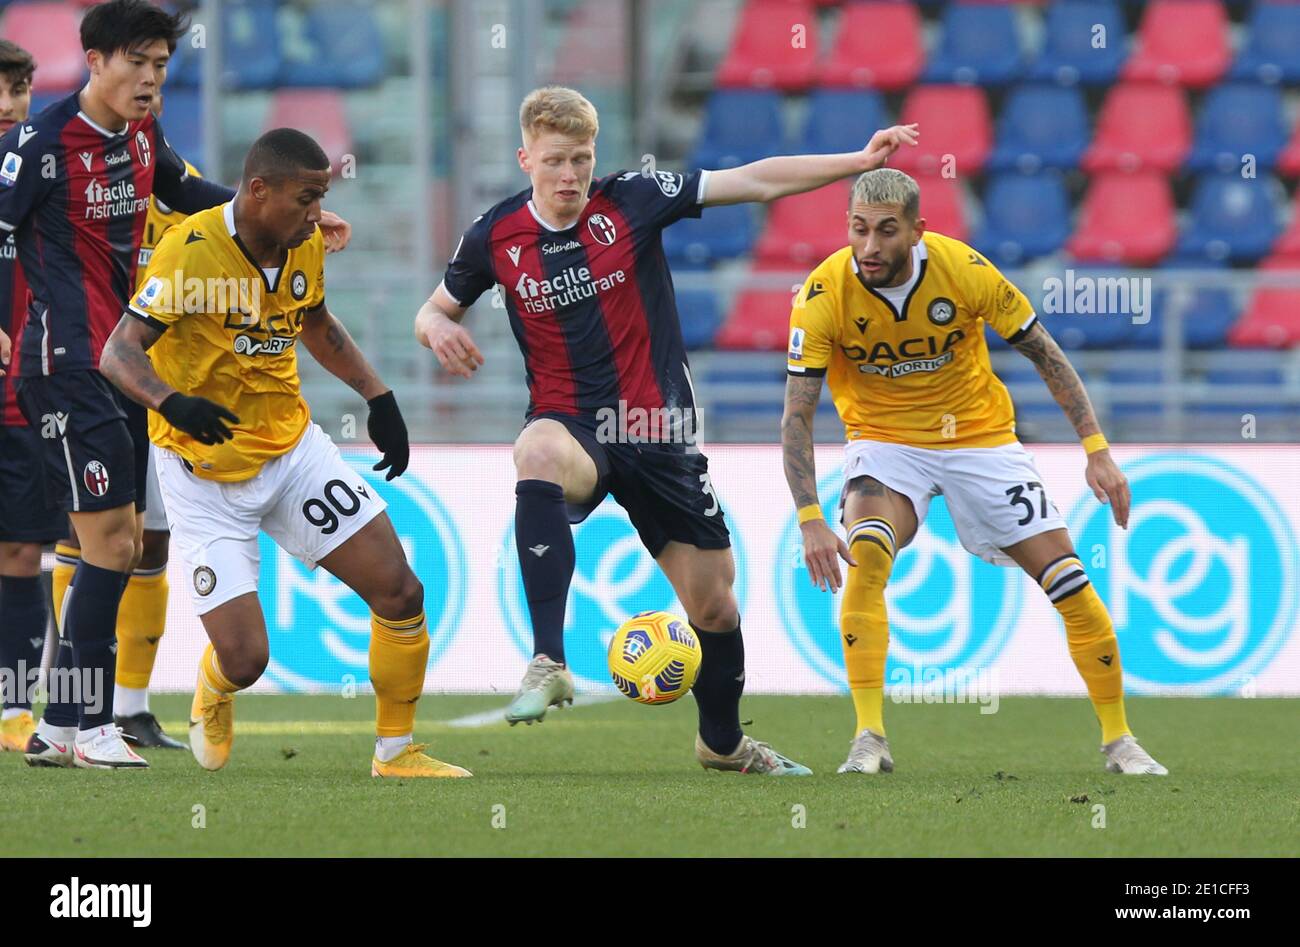 Bologna, Italy. 6th Jan, 2021. Bologna's Jerdy Schouten (C) Udinese's Marvin Zeegelaar (L) and Udinese's Roberto Pereyra (R) during the Italian Serie A soccer match Bologna Fc Udinese at the Renato Dall'Ara stadium in Bologna, Italy, 6 January 2021. Ph. Michele Nucci/LM Credit: Michele Nucci/LPS/ZUMA Wire/Alamy Live News Stock Photo